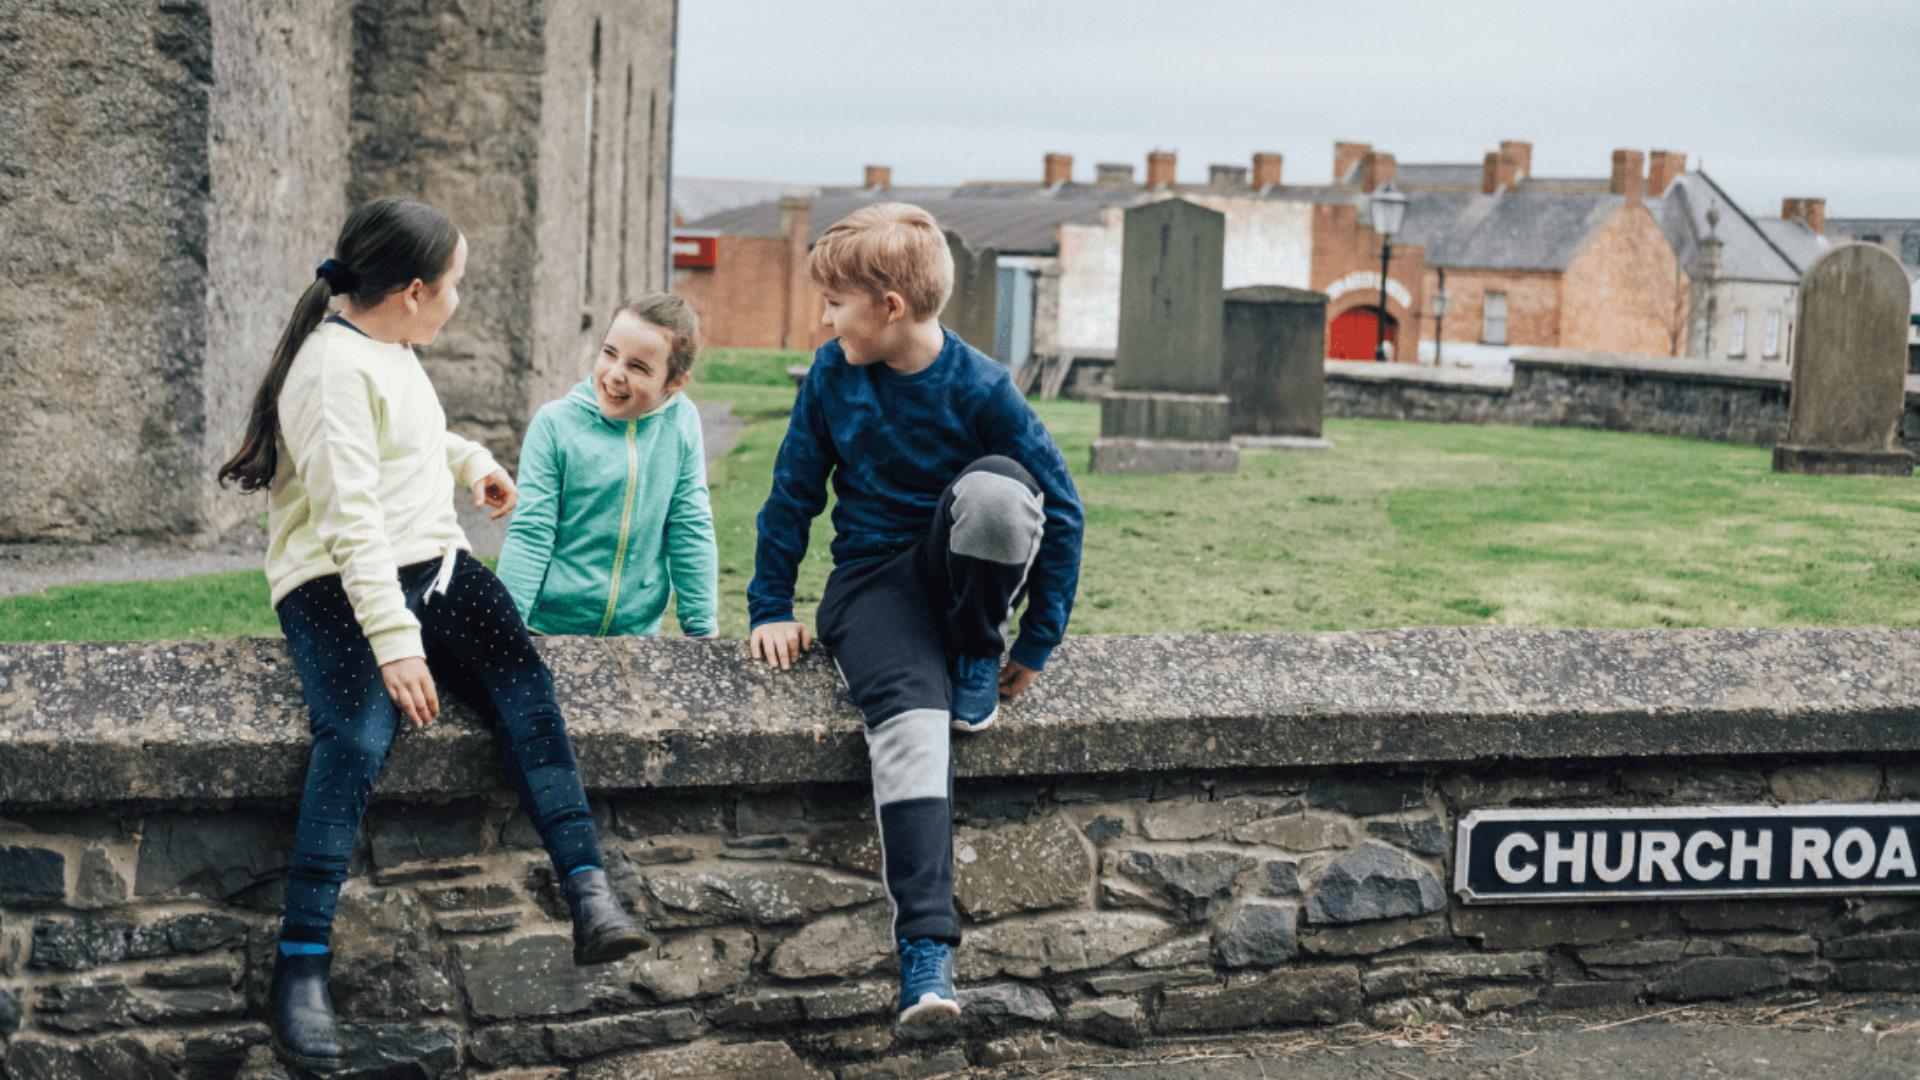 three children sitting on a stone wall at the ulster folk museum